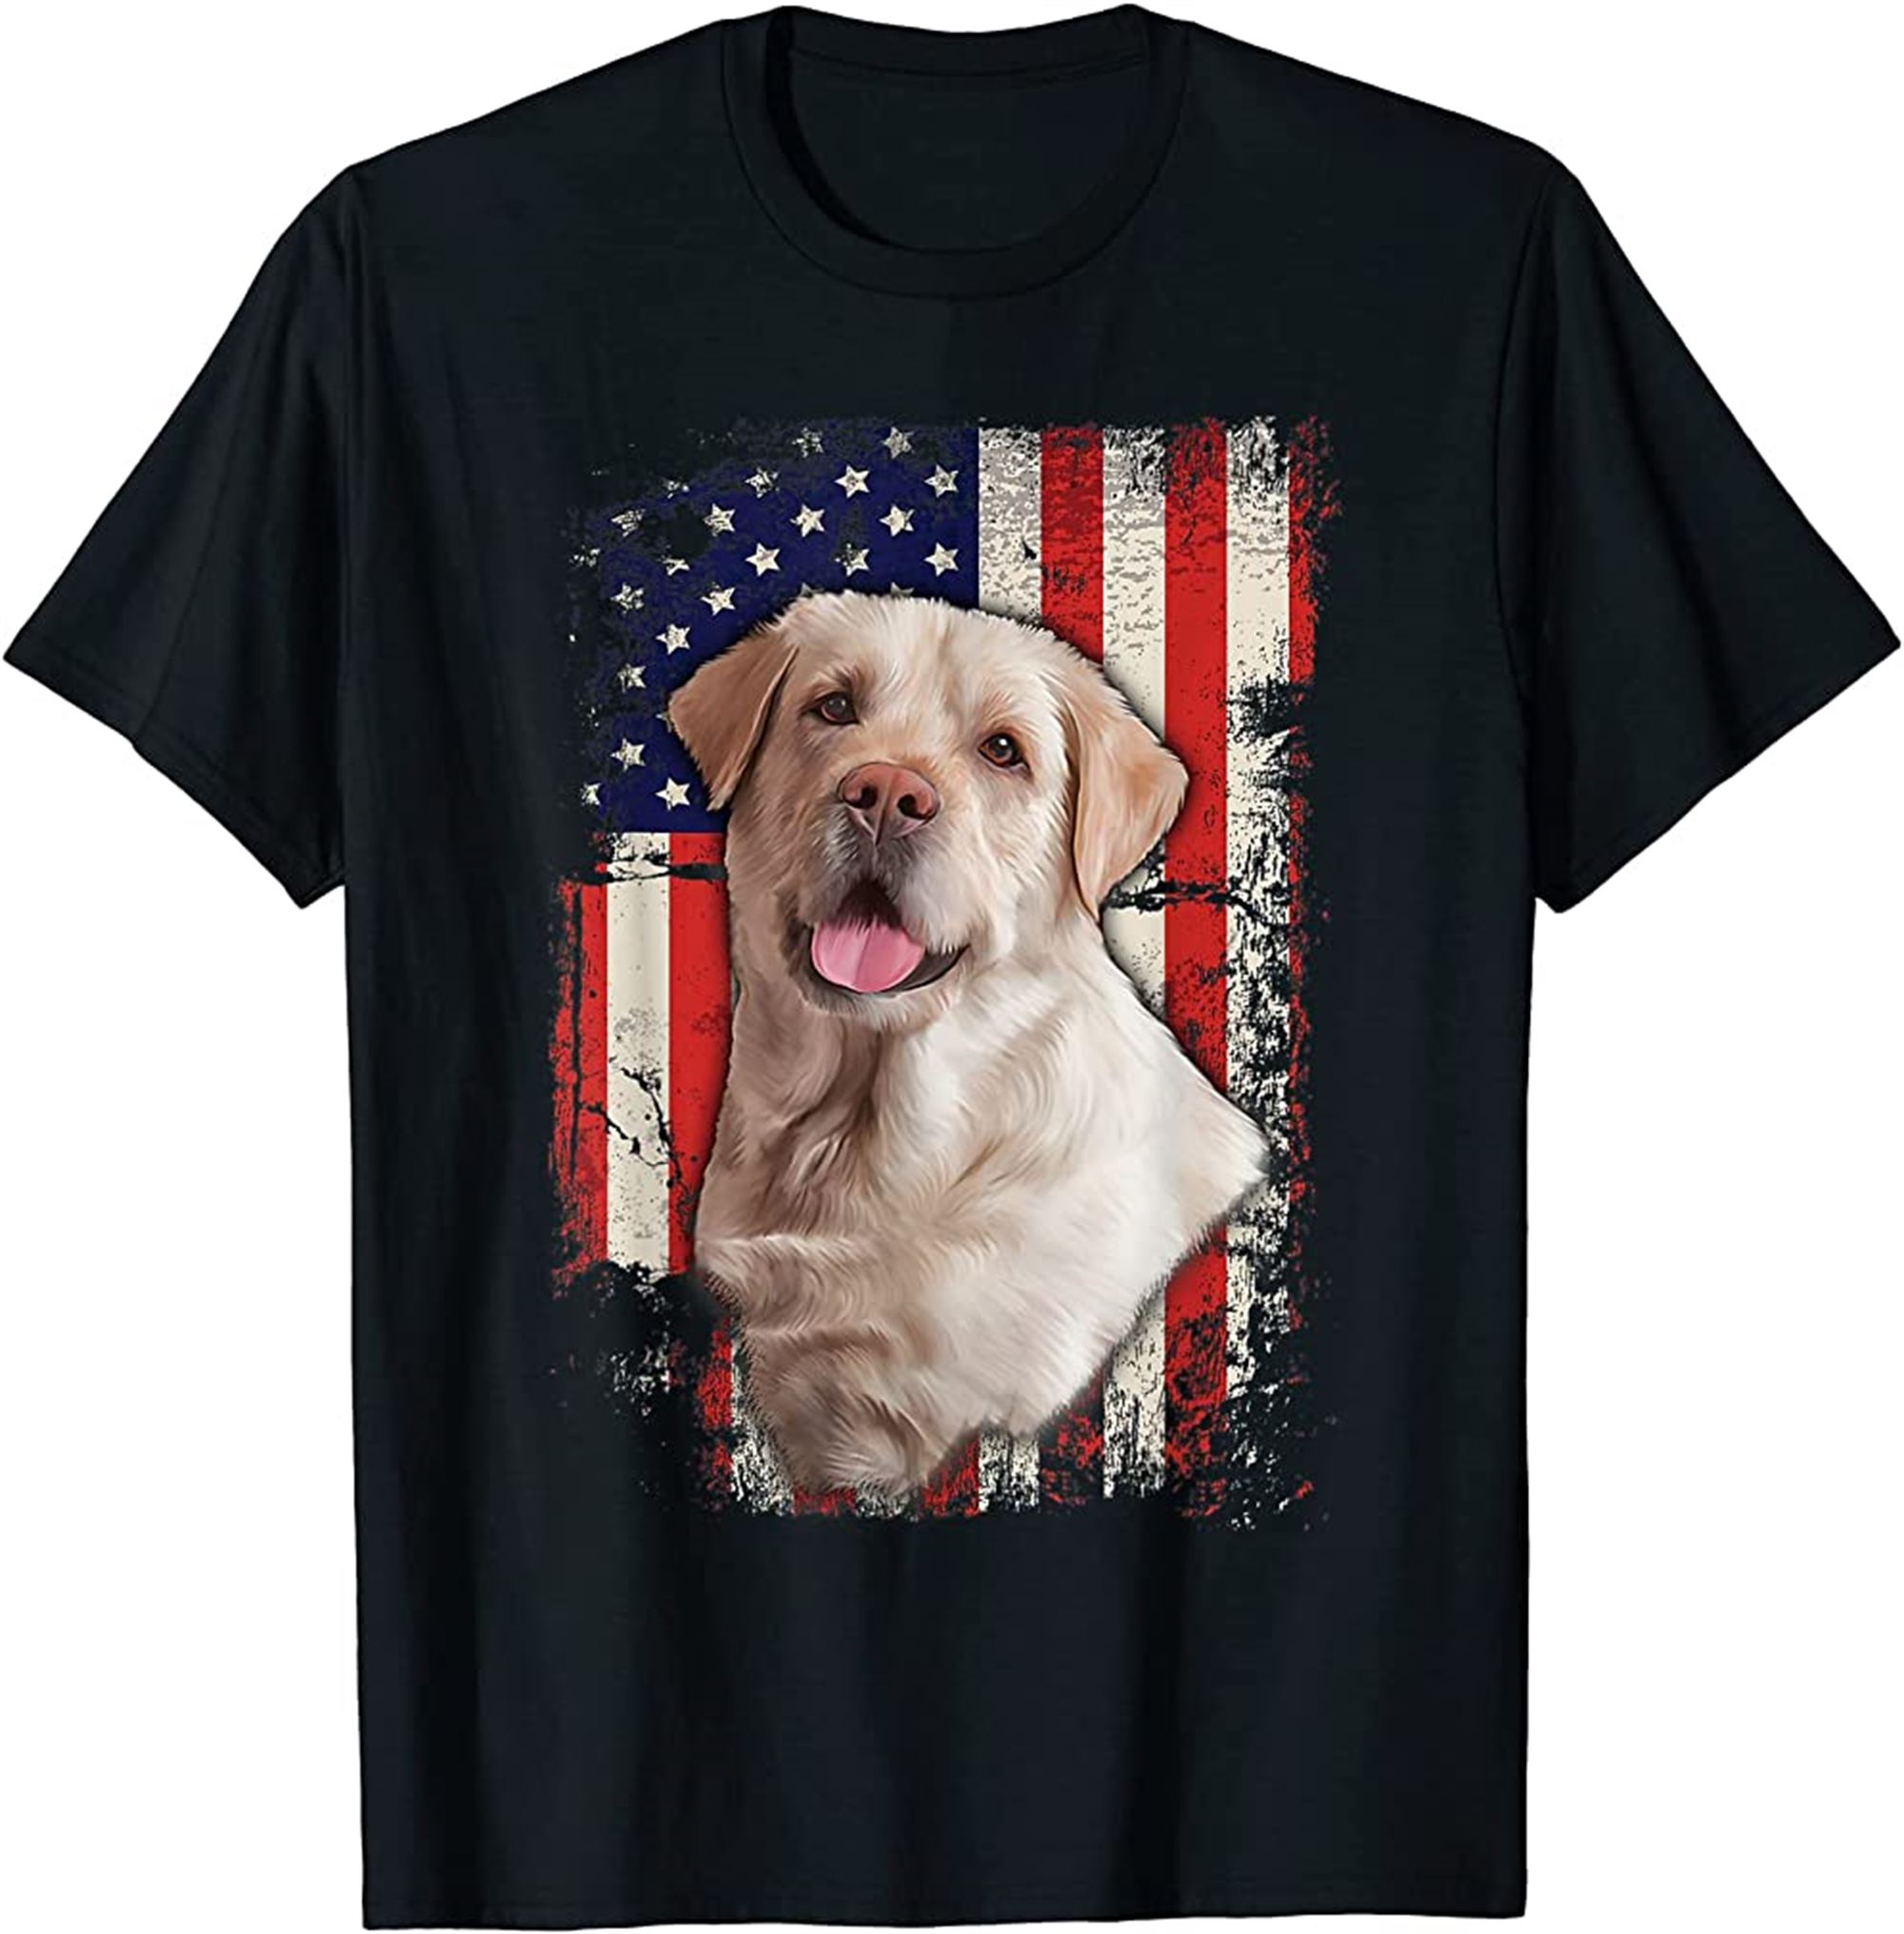 Yellow Labrador Labs Patriotic American Flag Dog 4th Of July T-shirt Full Size Up To 5xl